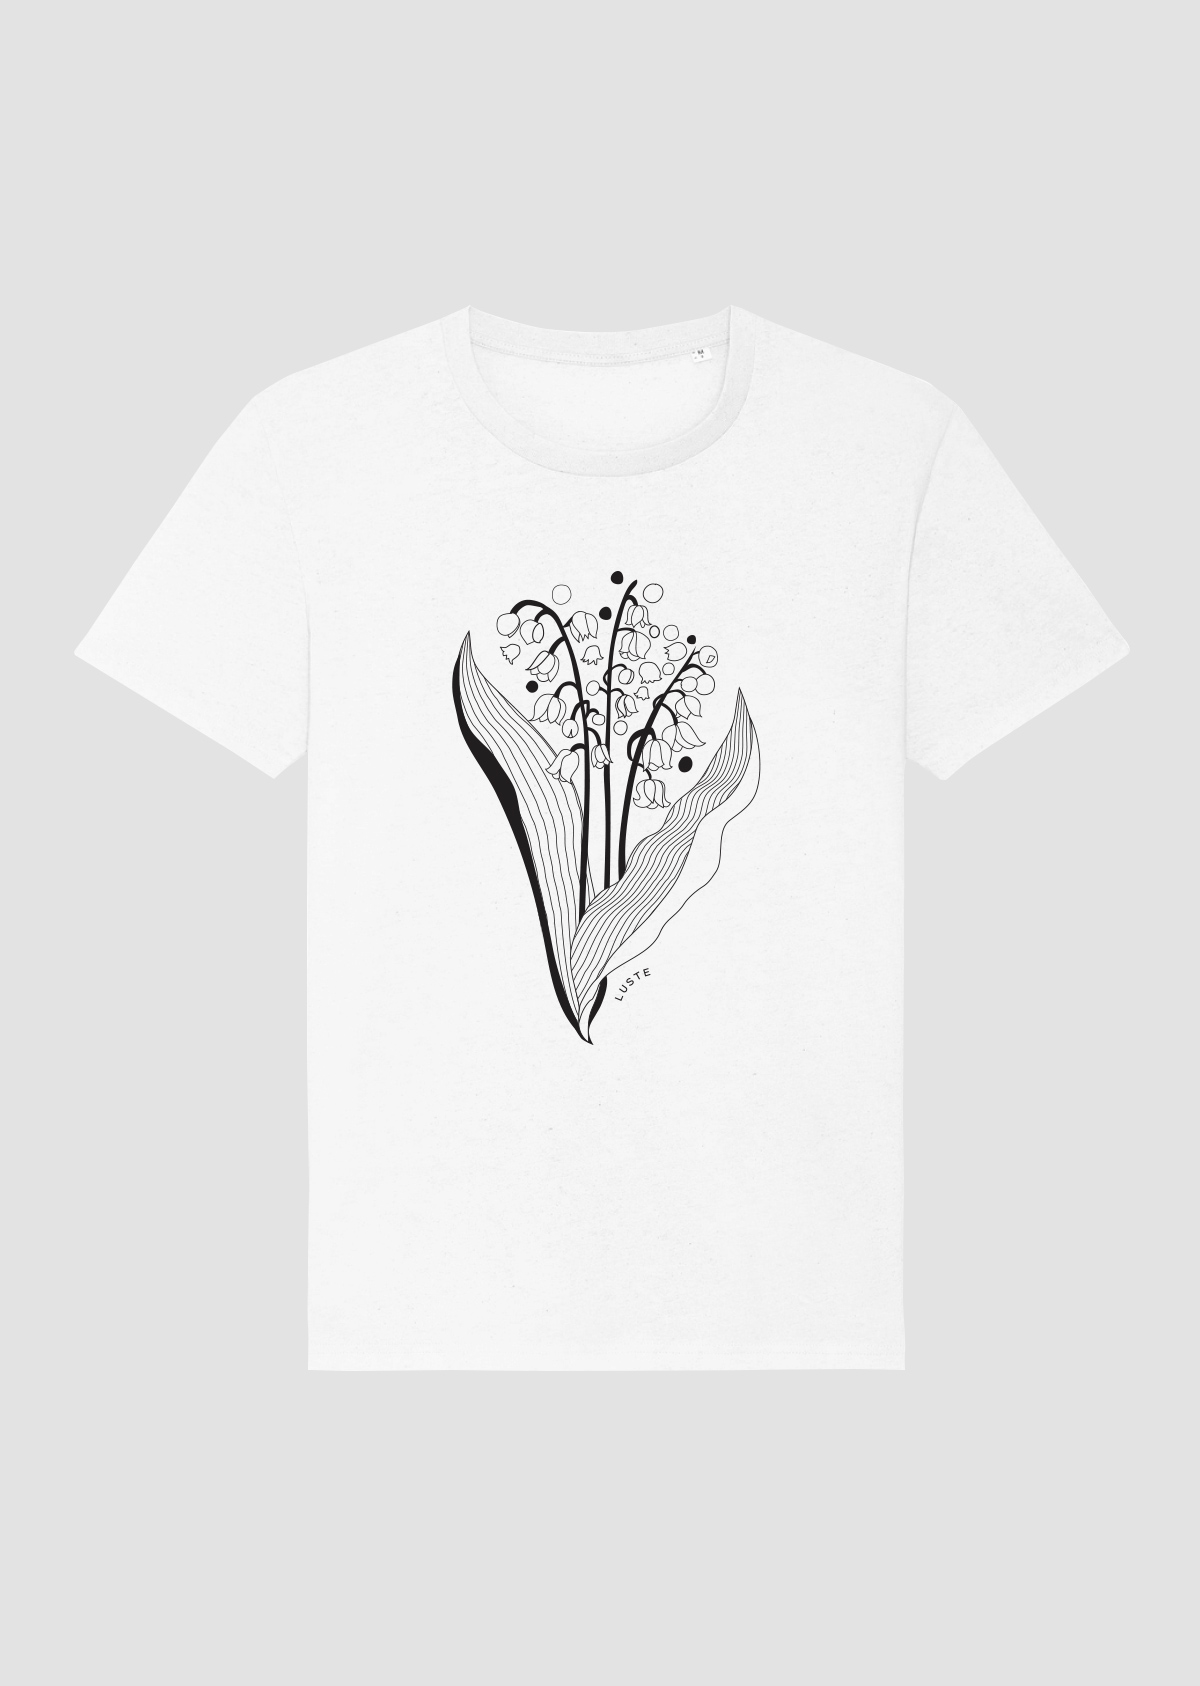 T-Shirt "Charming Lily of the valley"